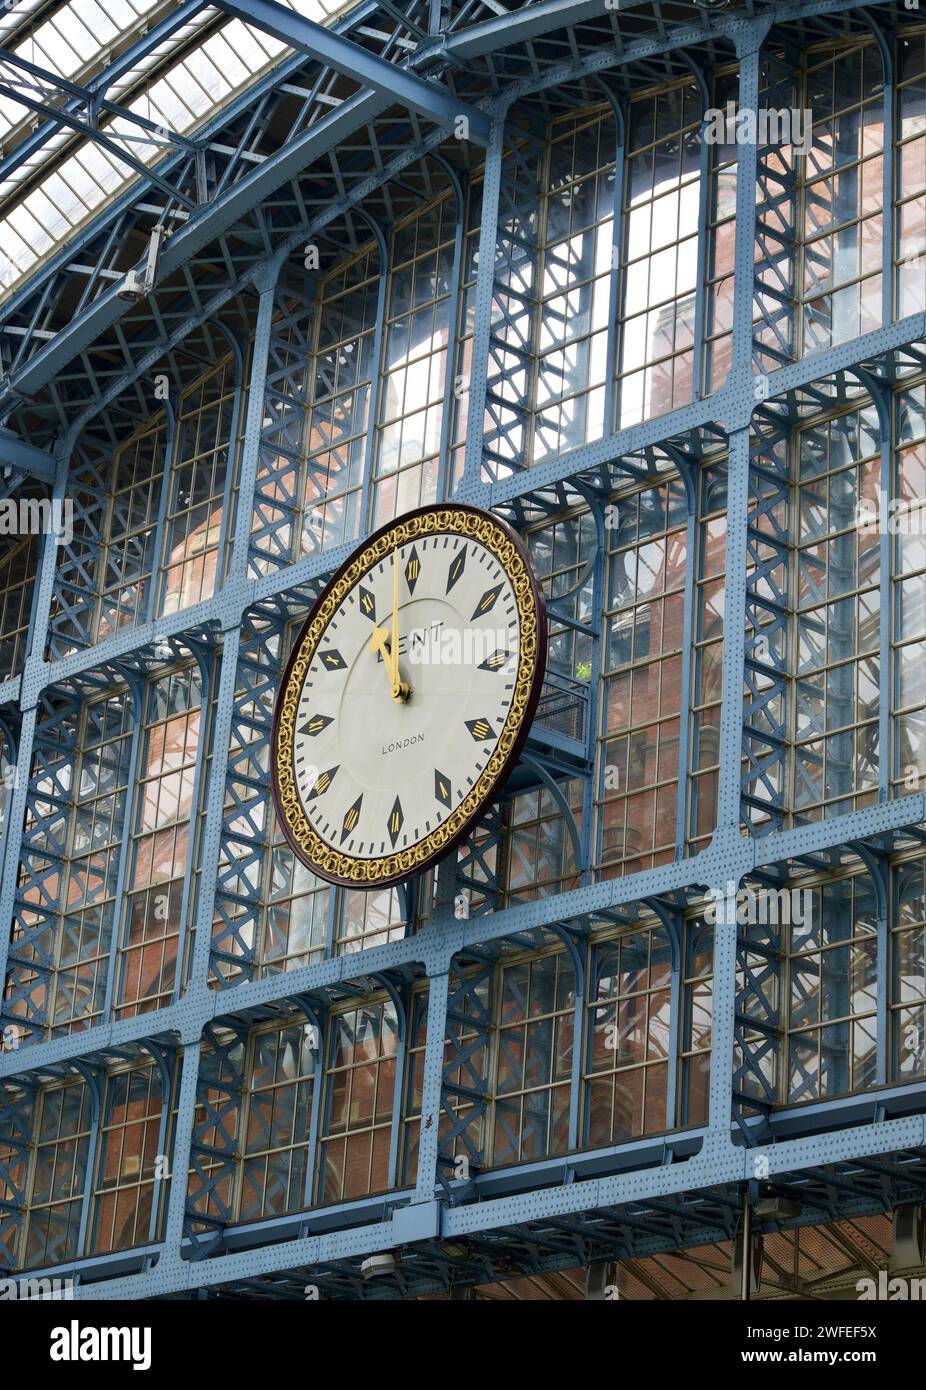 Images taken in and around St Pancras International Station. Stock Photo